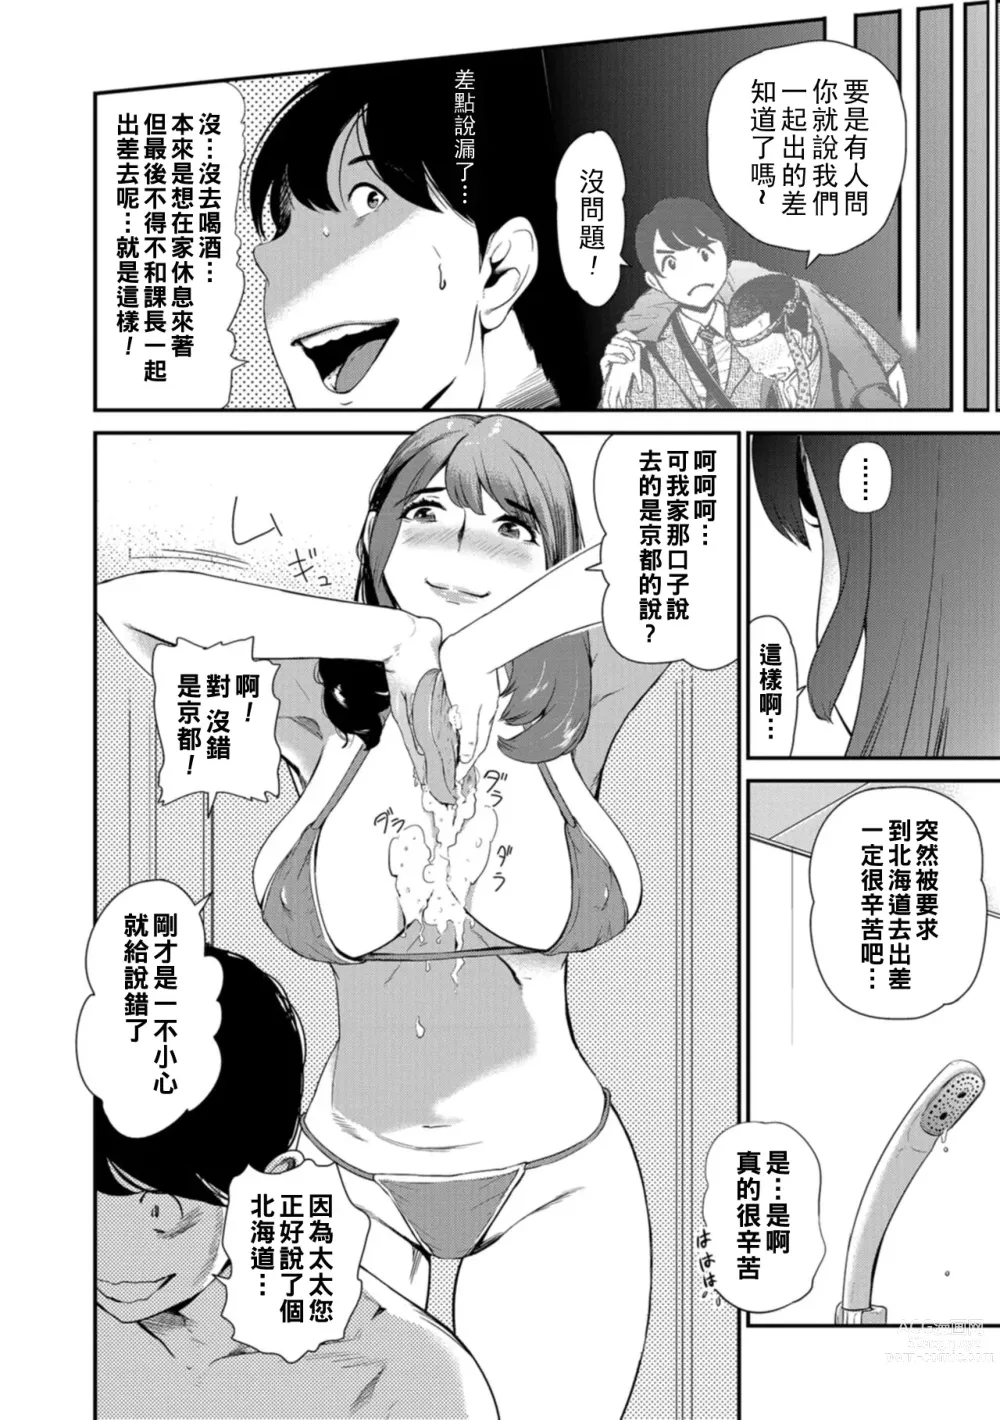 Page 6 of manga Mission In Pussy